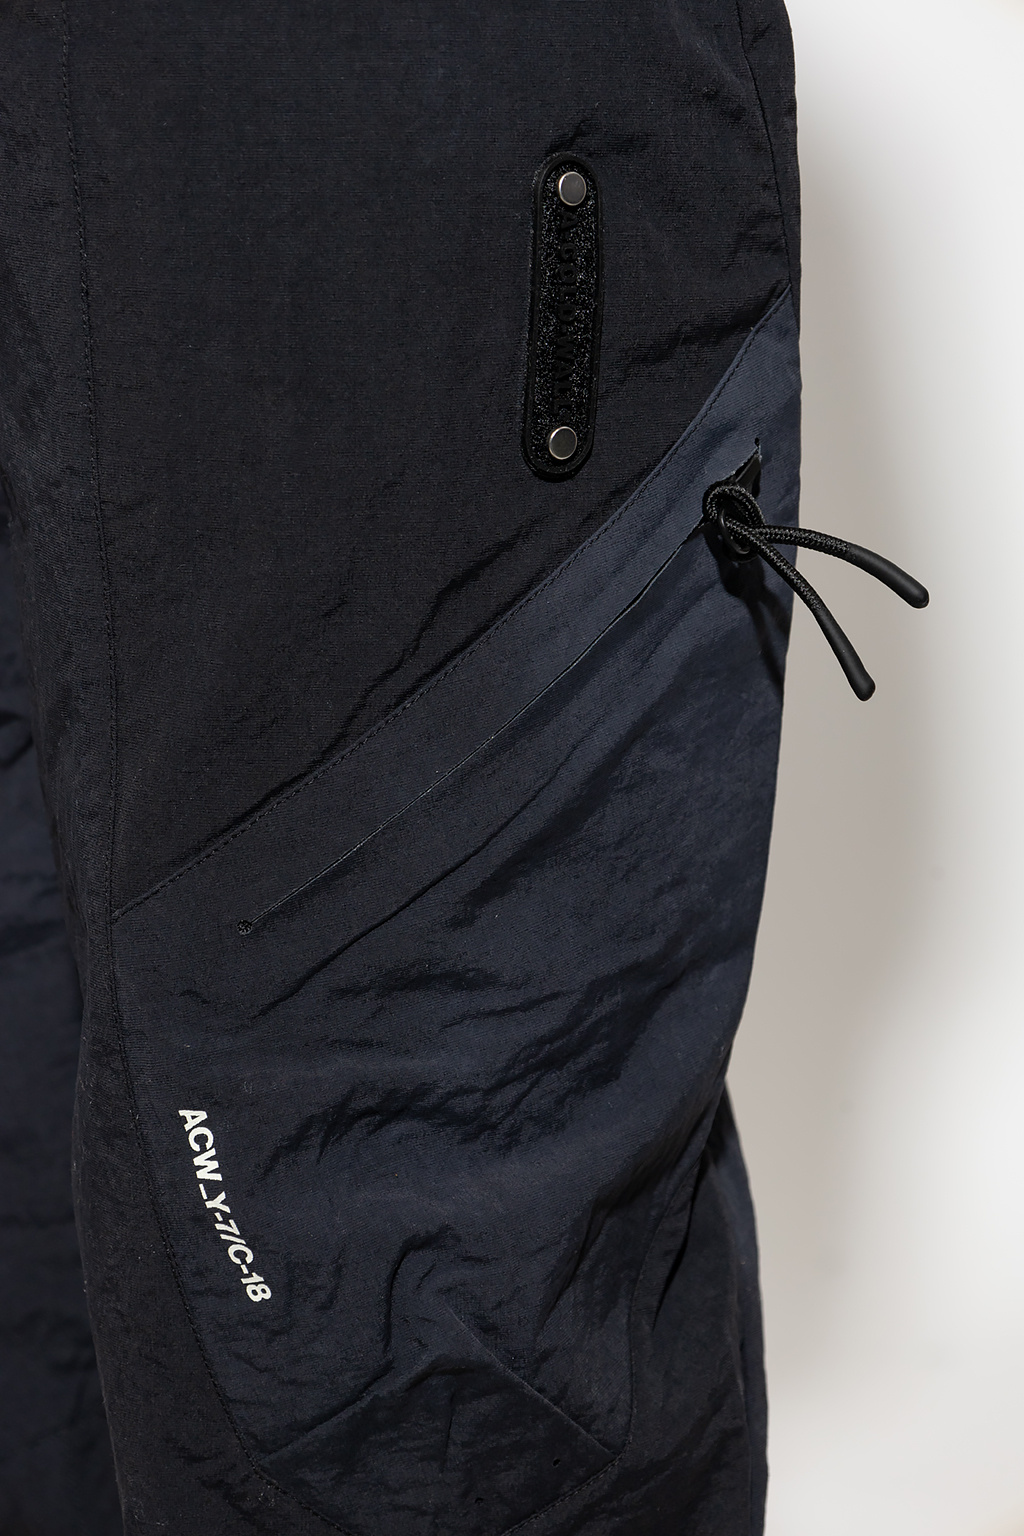 A-COLD-WALL* side trousers with logo